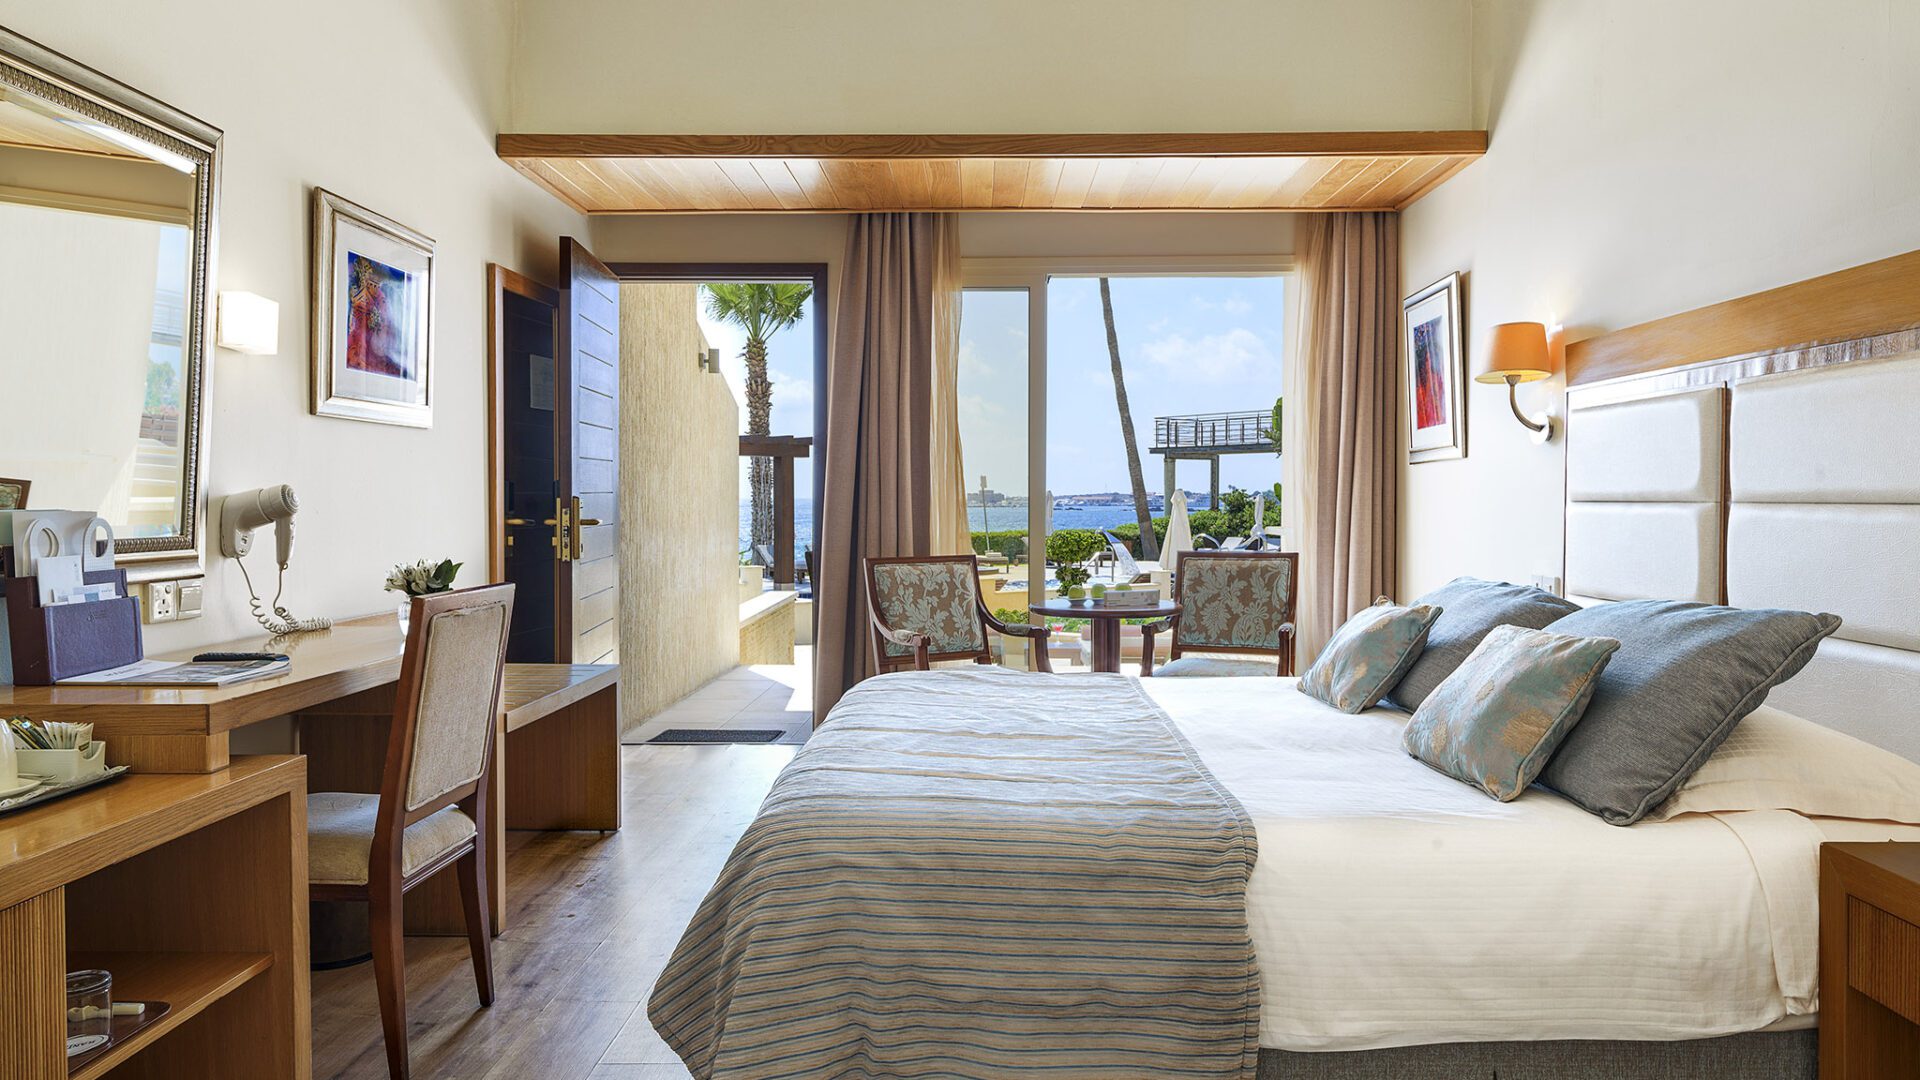 A Suite with private garden overlooking the mediterranean.